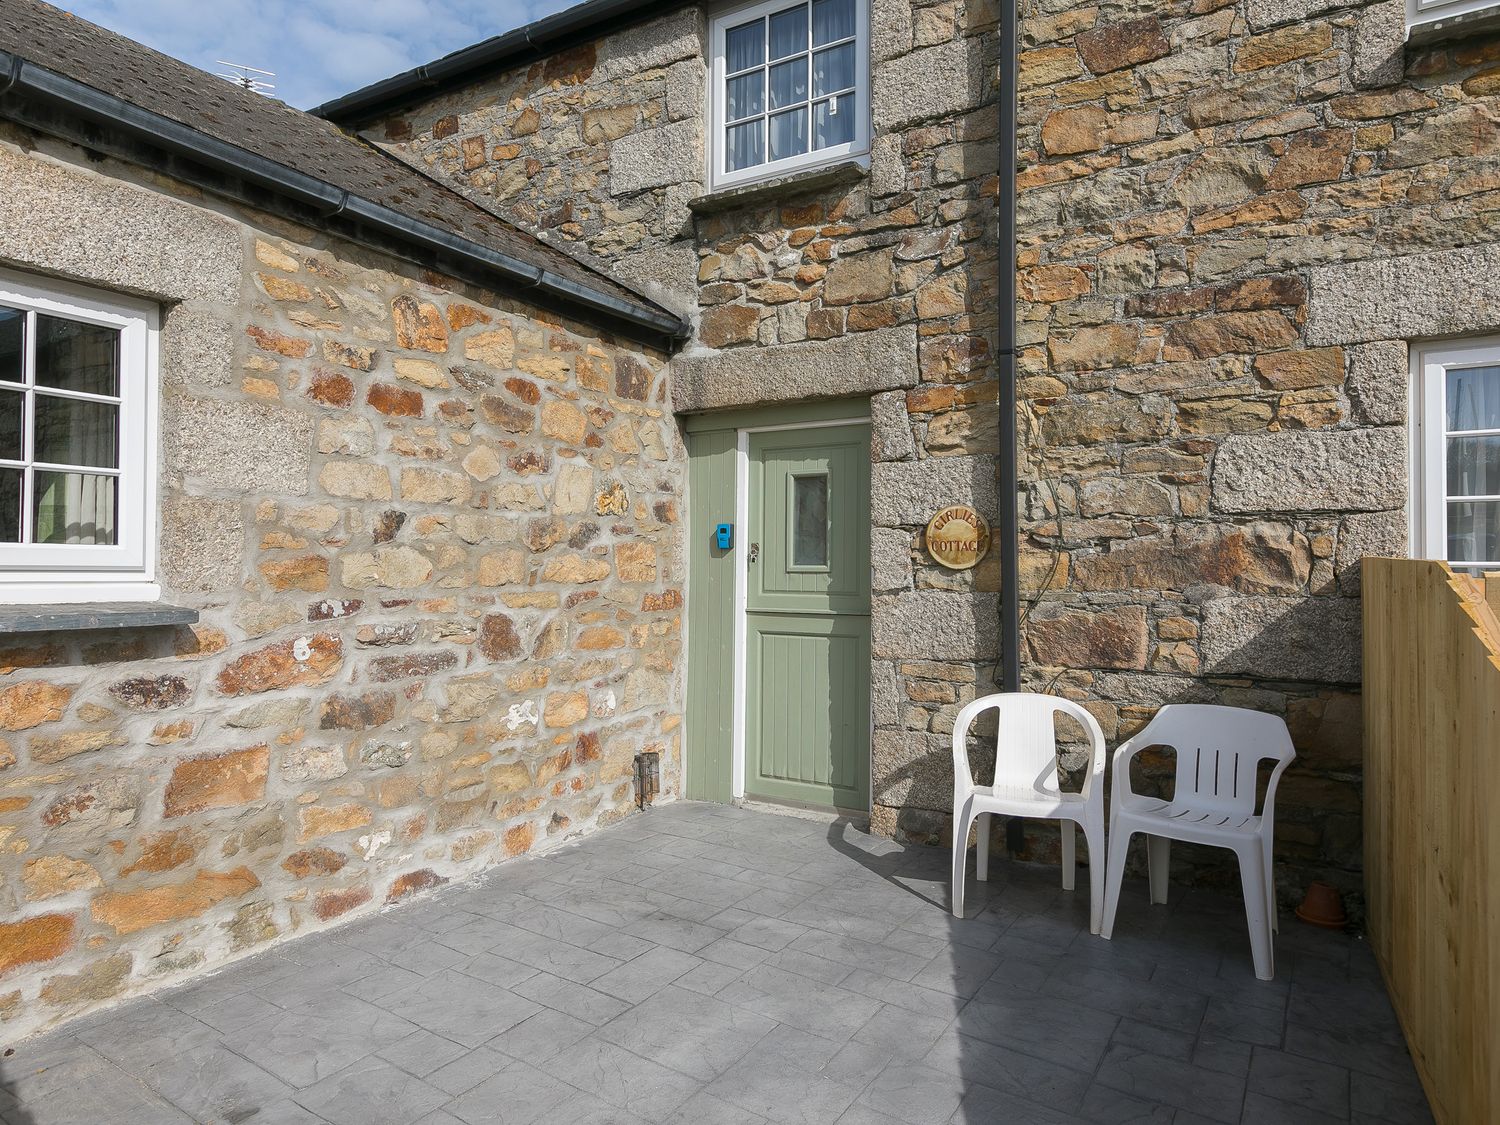 Girlie's Cottage - Cornwall - 1082755 - photo 1